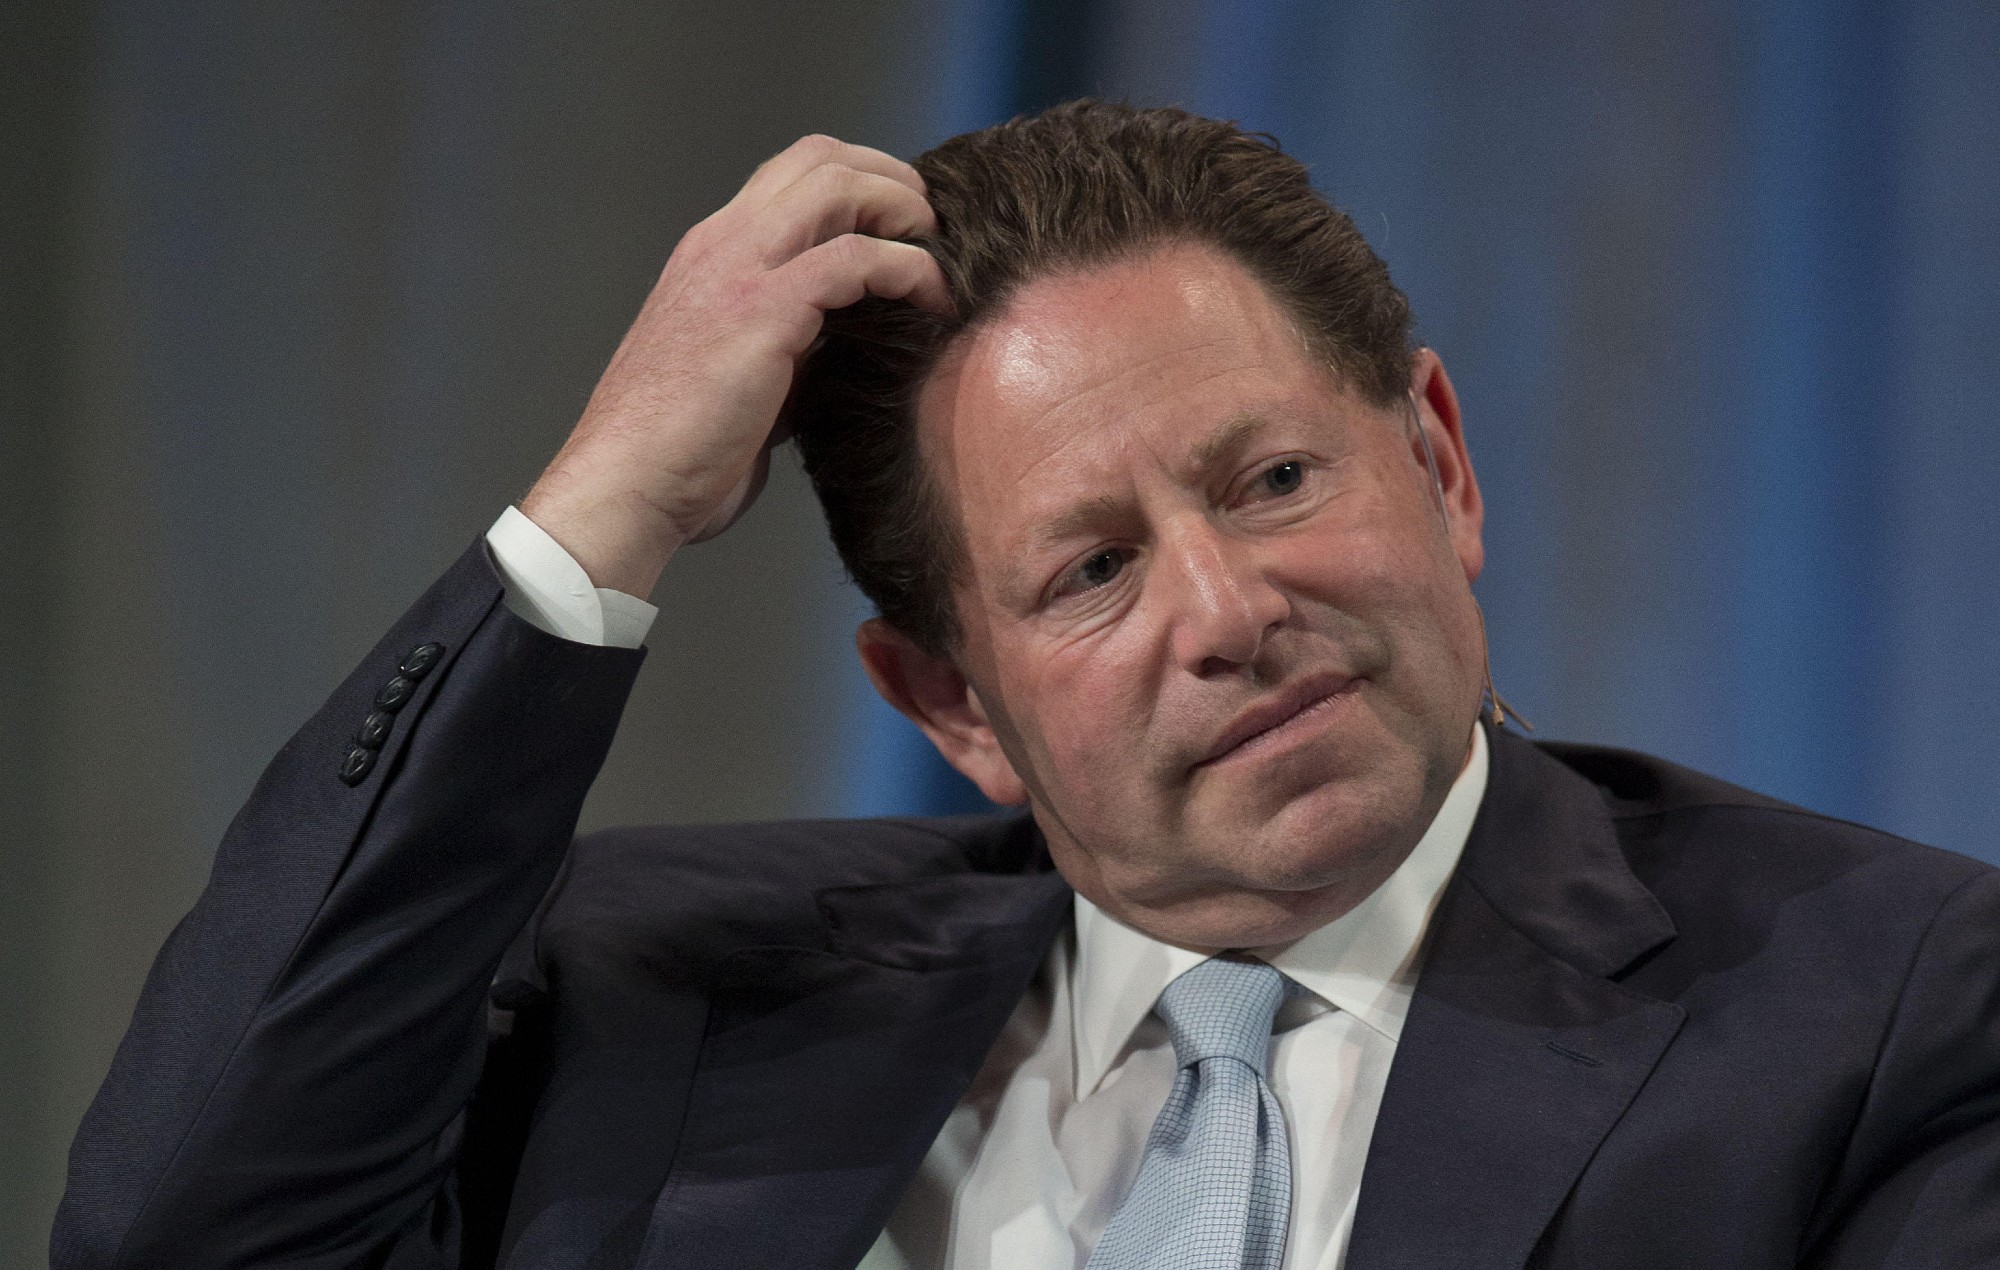 Activision boss Bobby Kotick accuses Sony of trying to ‘sabotage’ Microsoft takeover bid